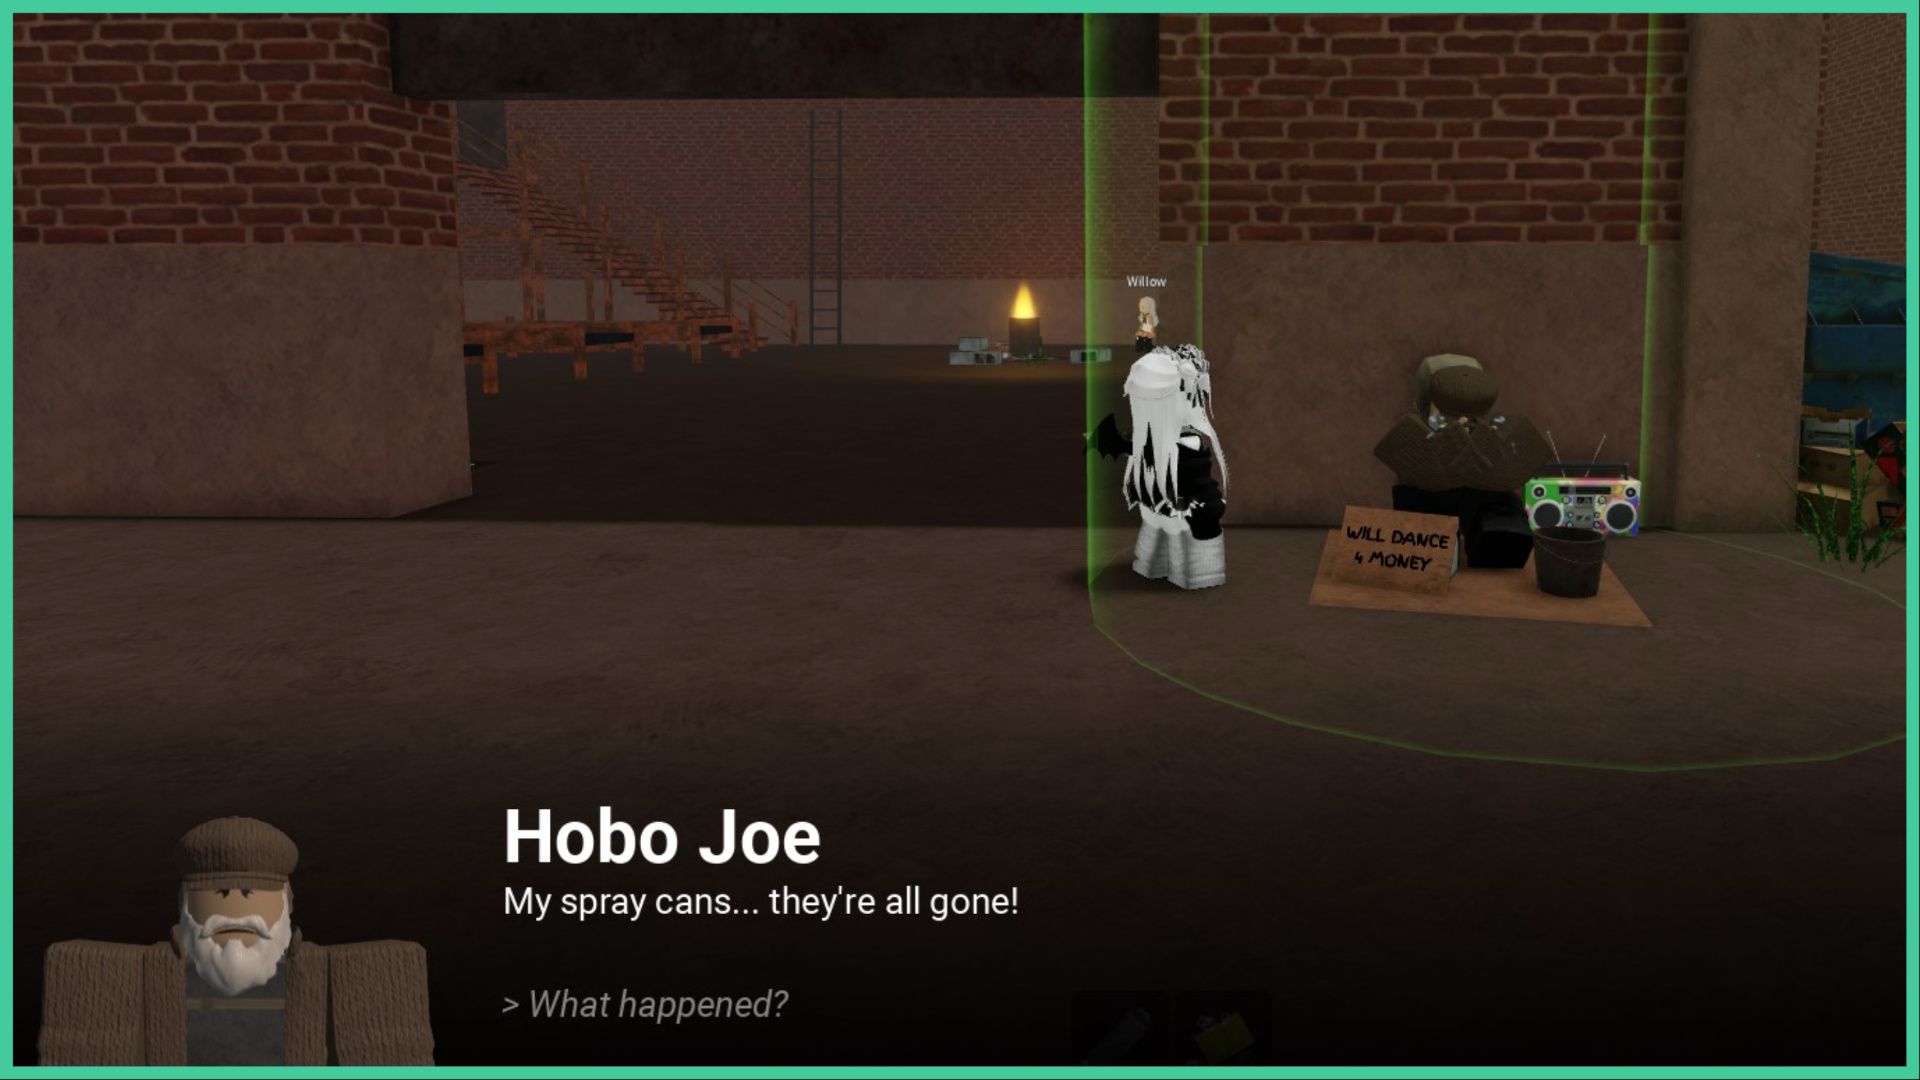 feature image for our spray paint the hunt guide, the image features a screenshot of a roblox player standing next to the NPC hobo joe as he sits on the floor with a bucket, a stereo and a cardboard sign that reads 'will dance 4 money', he has a green light around him as dialogue pops up at the bottom of the screen next to his character portrait that reads 'my spray cans, they're all gone'